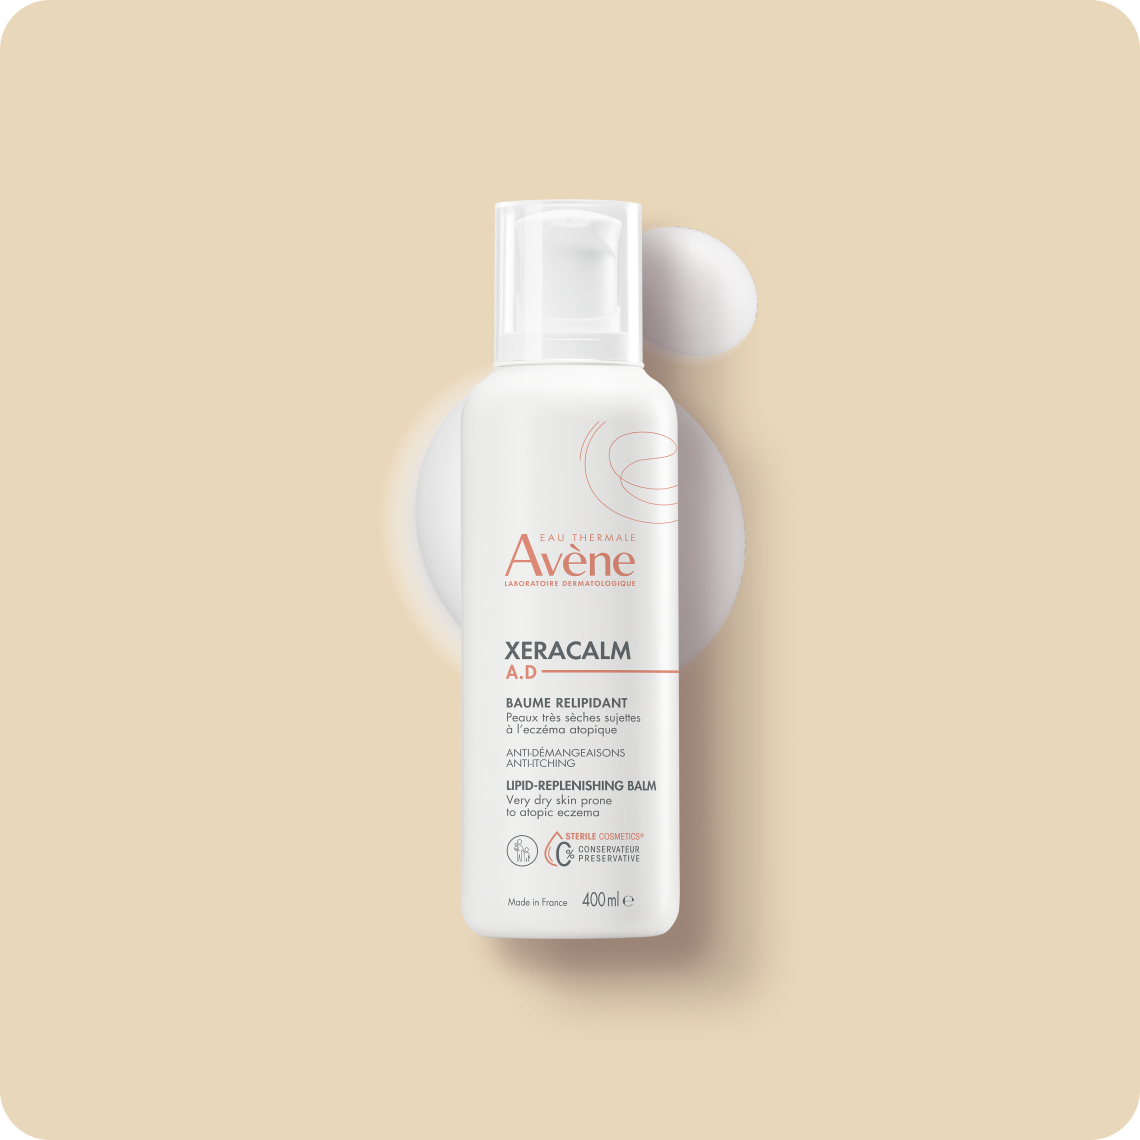 𝗔𝗩𝗘𝗡𝗘 🤩 Shop all Avene products, always available on